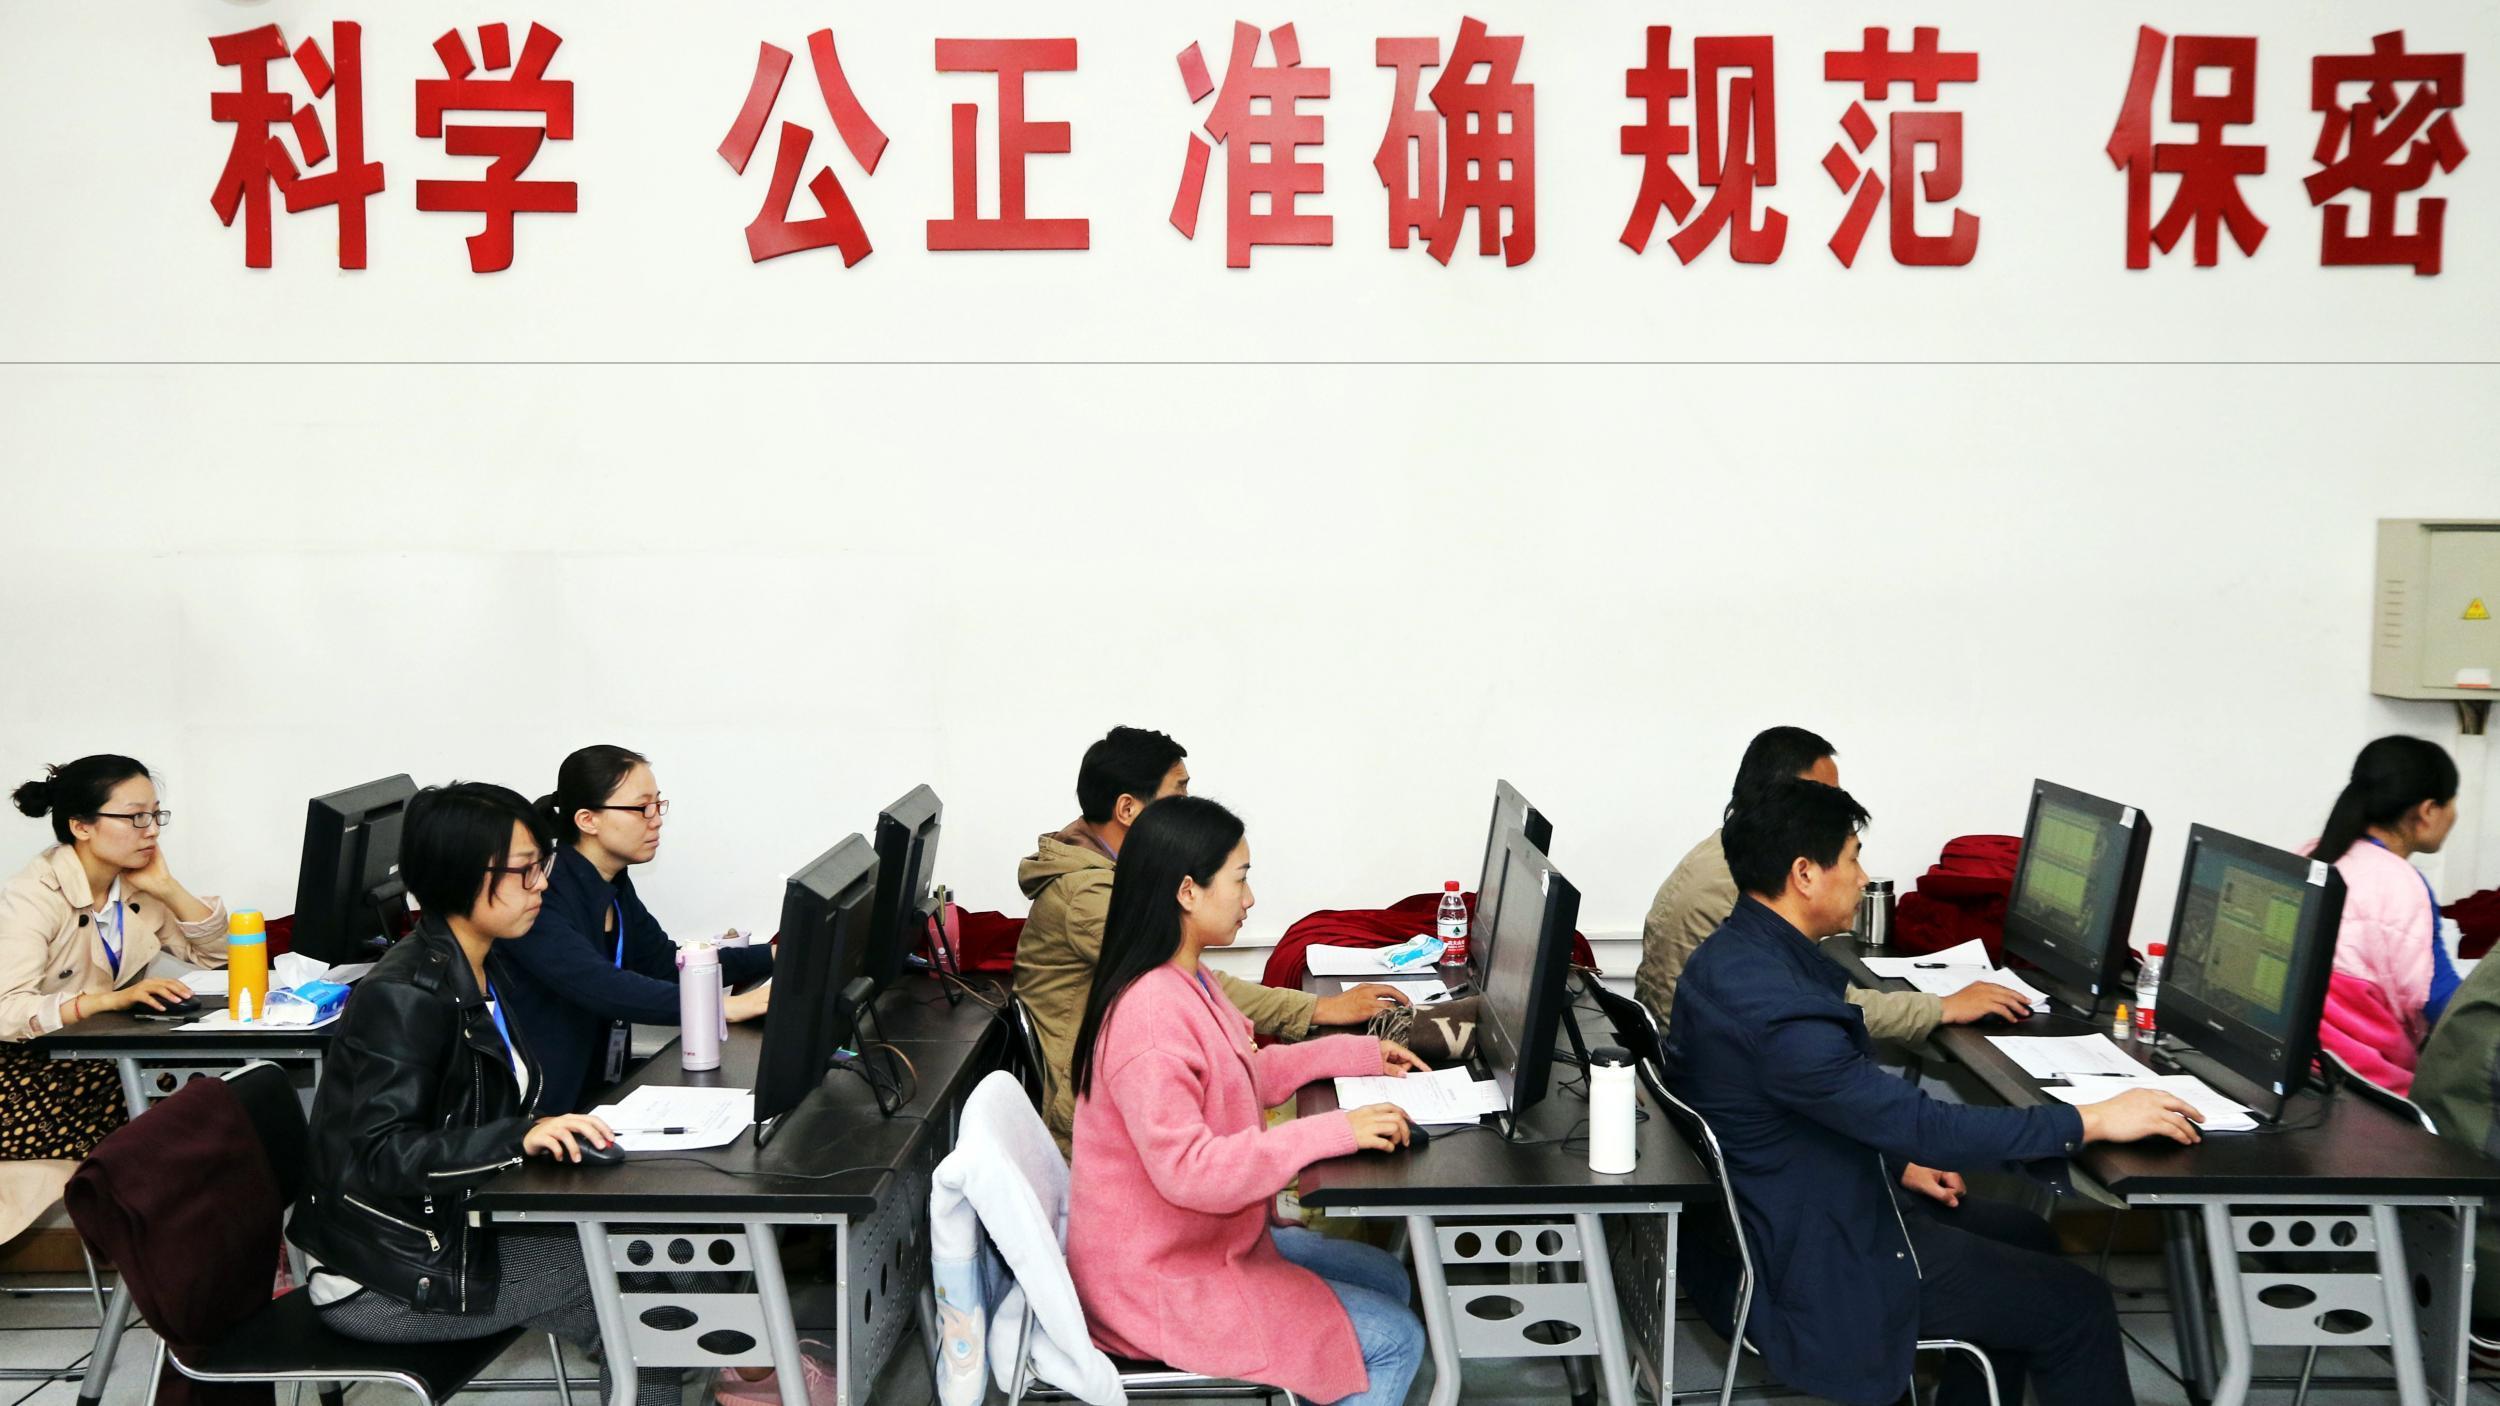 Staff monitor students during a university entrance exam in Zhengzhou in June 2016. Pupils across China sit the annual ‘gaokao’, a national obsession which decides the fates of millions